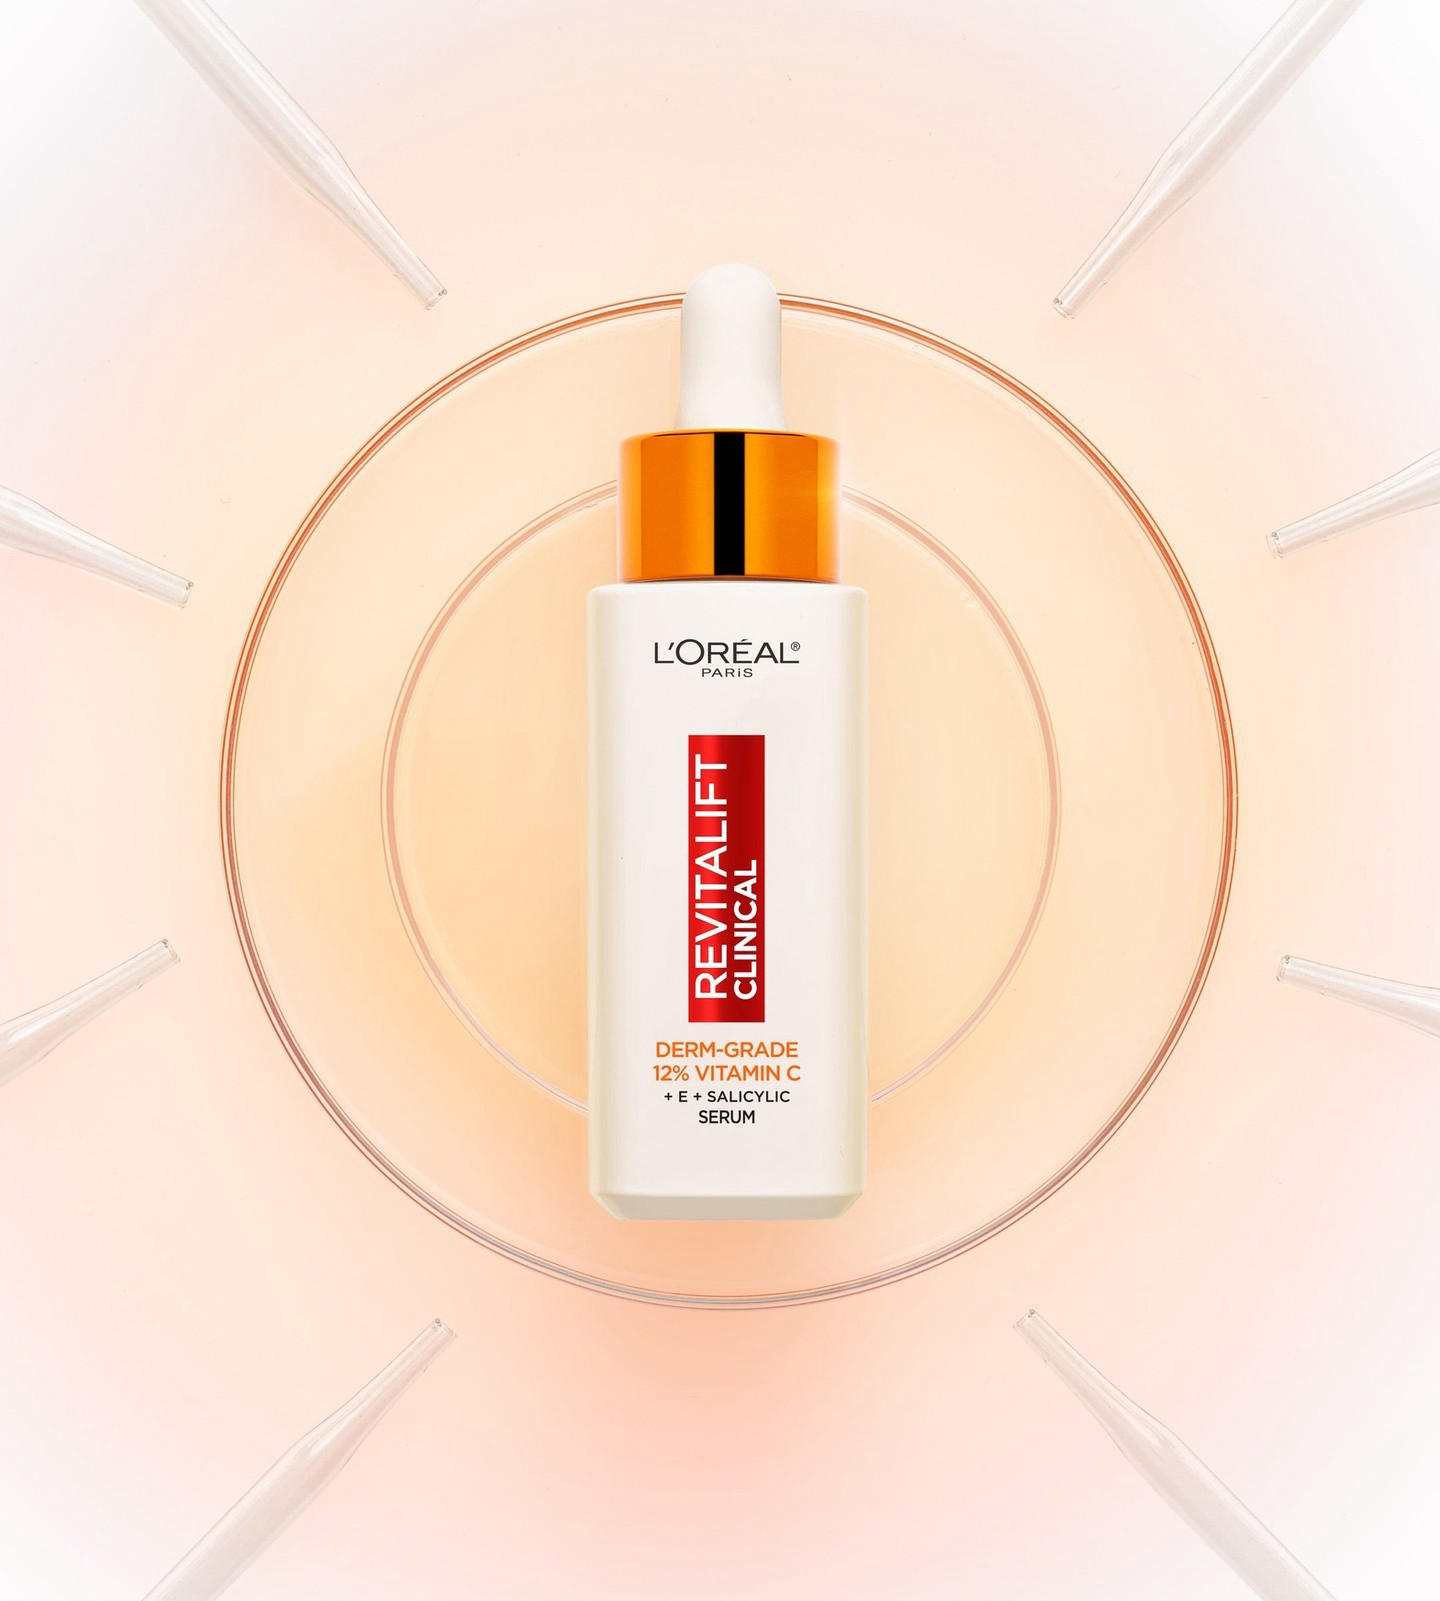 L'Oréal Paris Official - Give your skin the glow it deserves with our new 12% Pure Vitamin C Serum